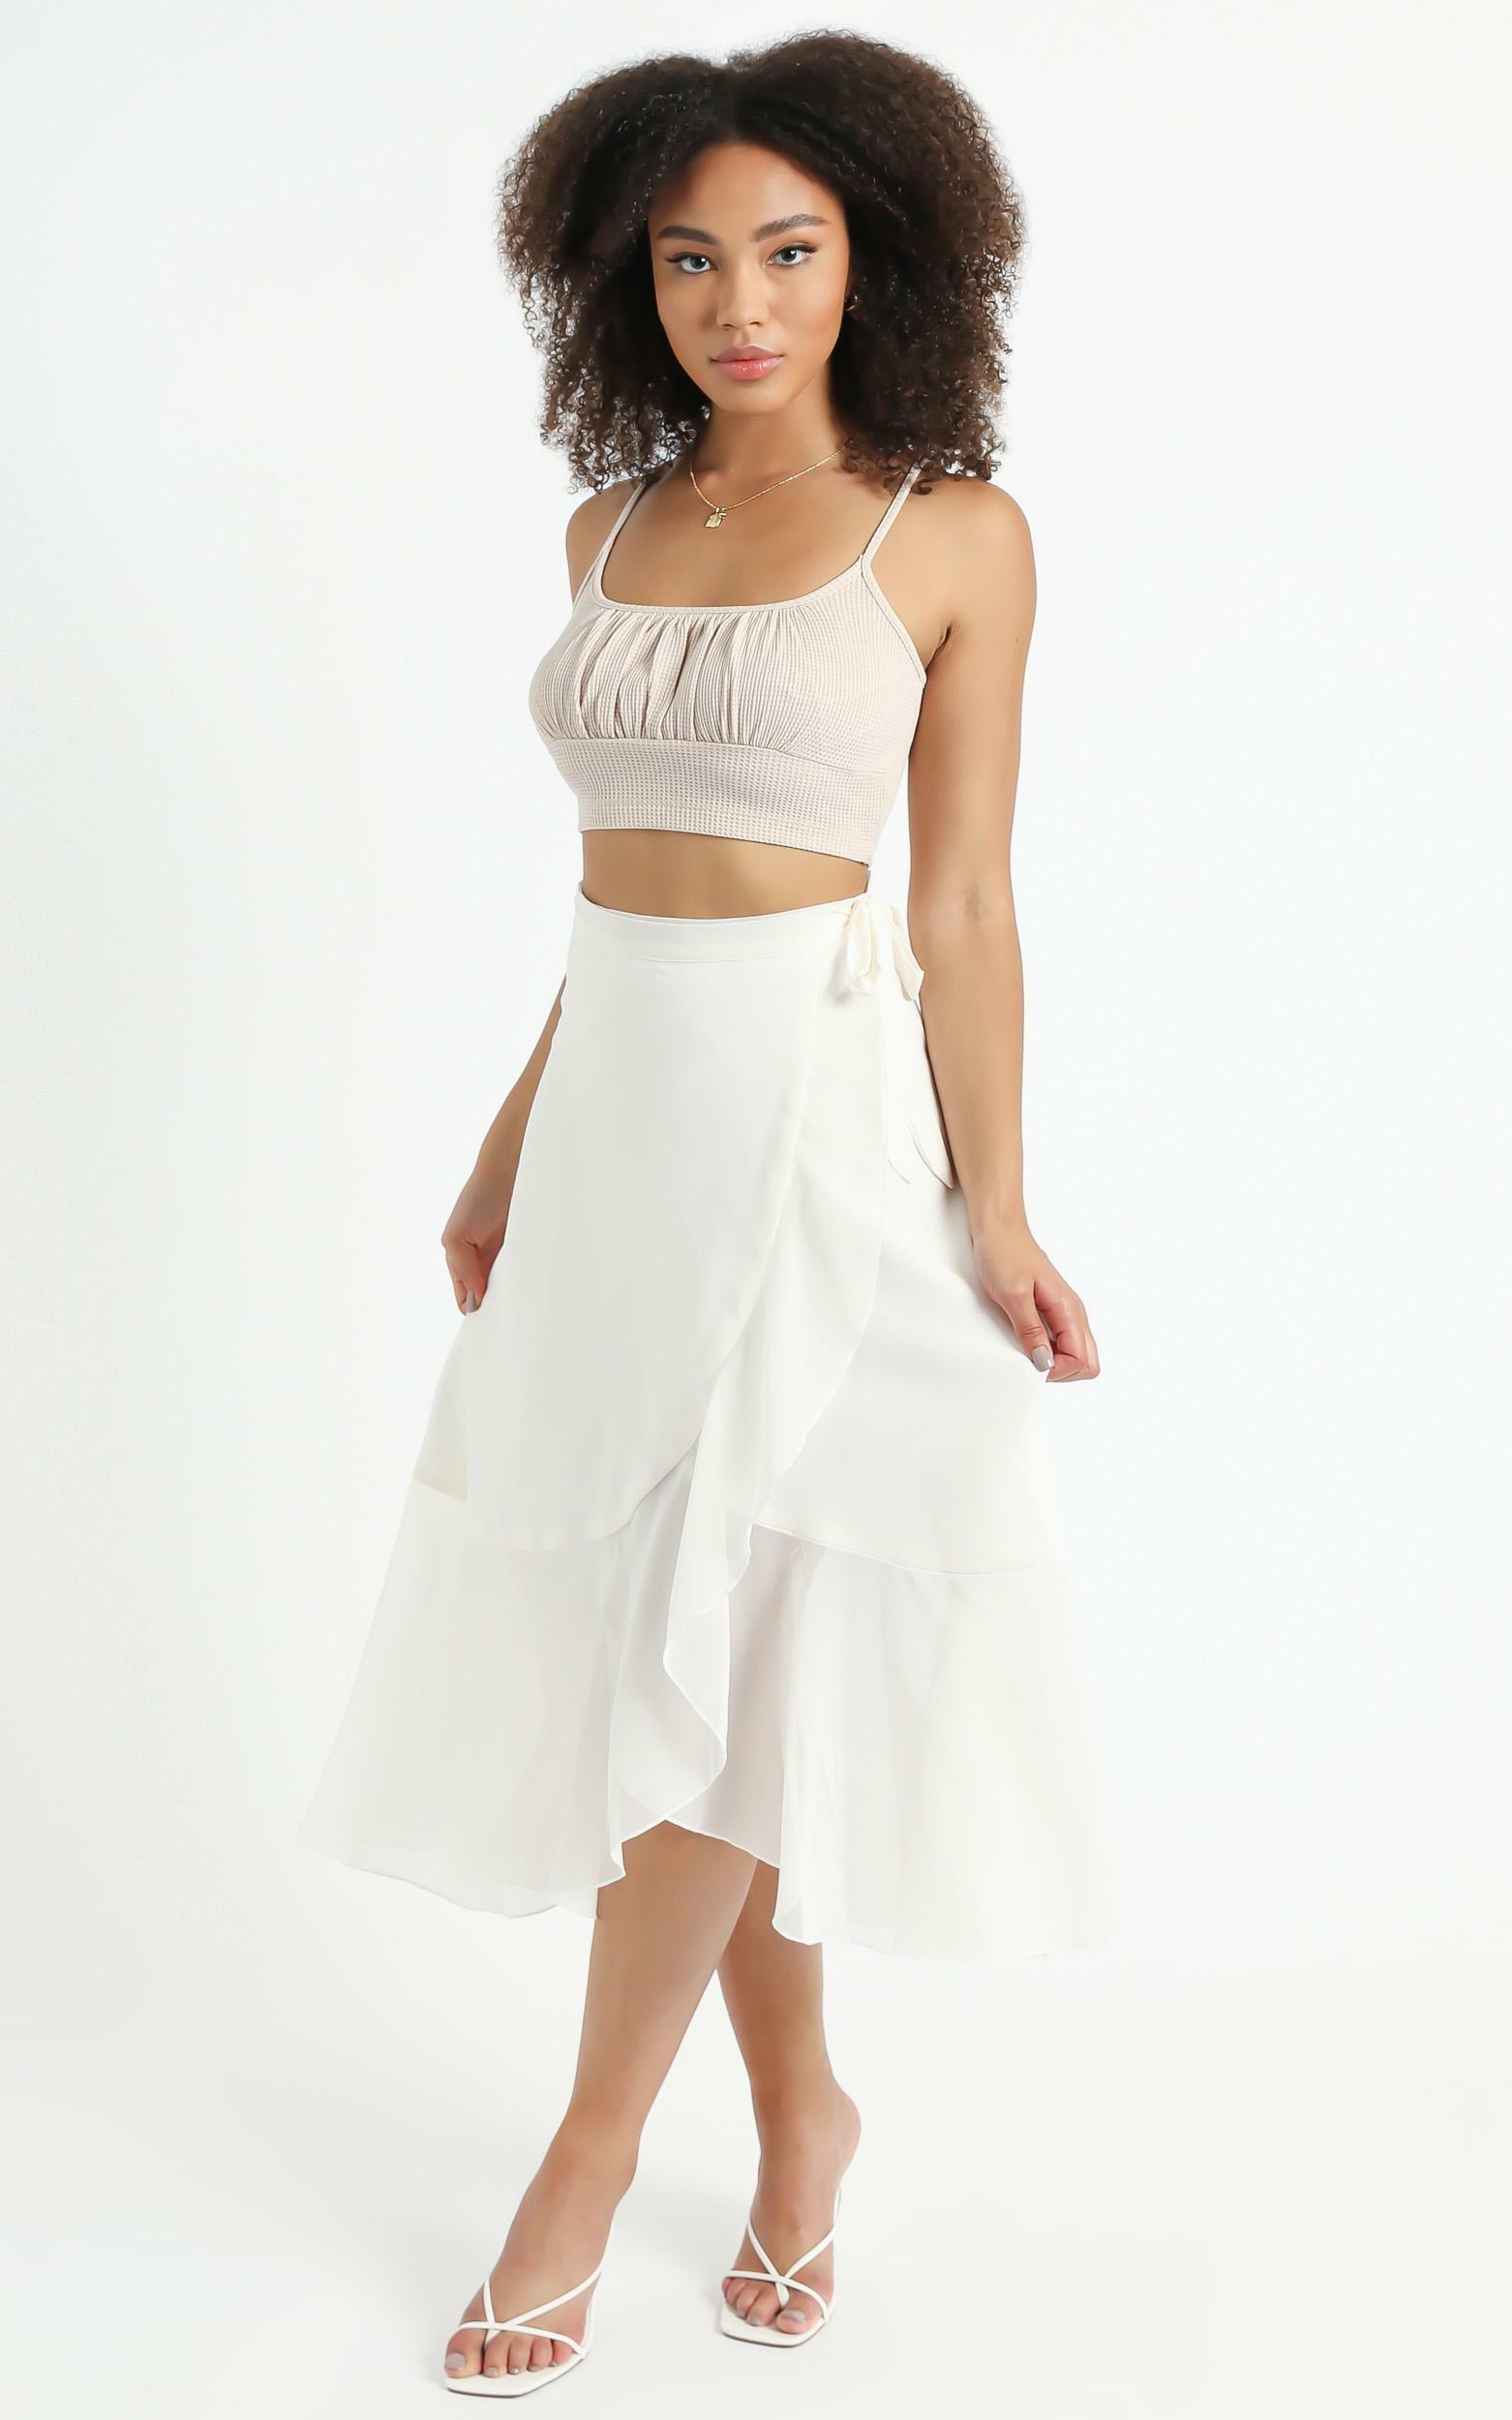 Add To The Mix Skirt in White - 06, WHT3, hi-res image number null